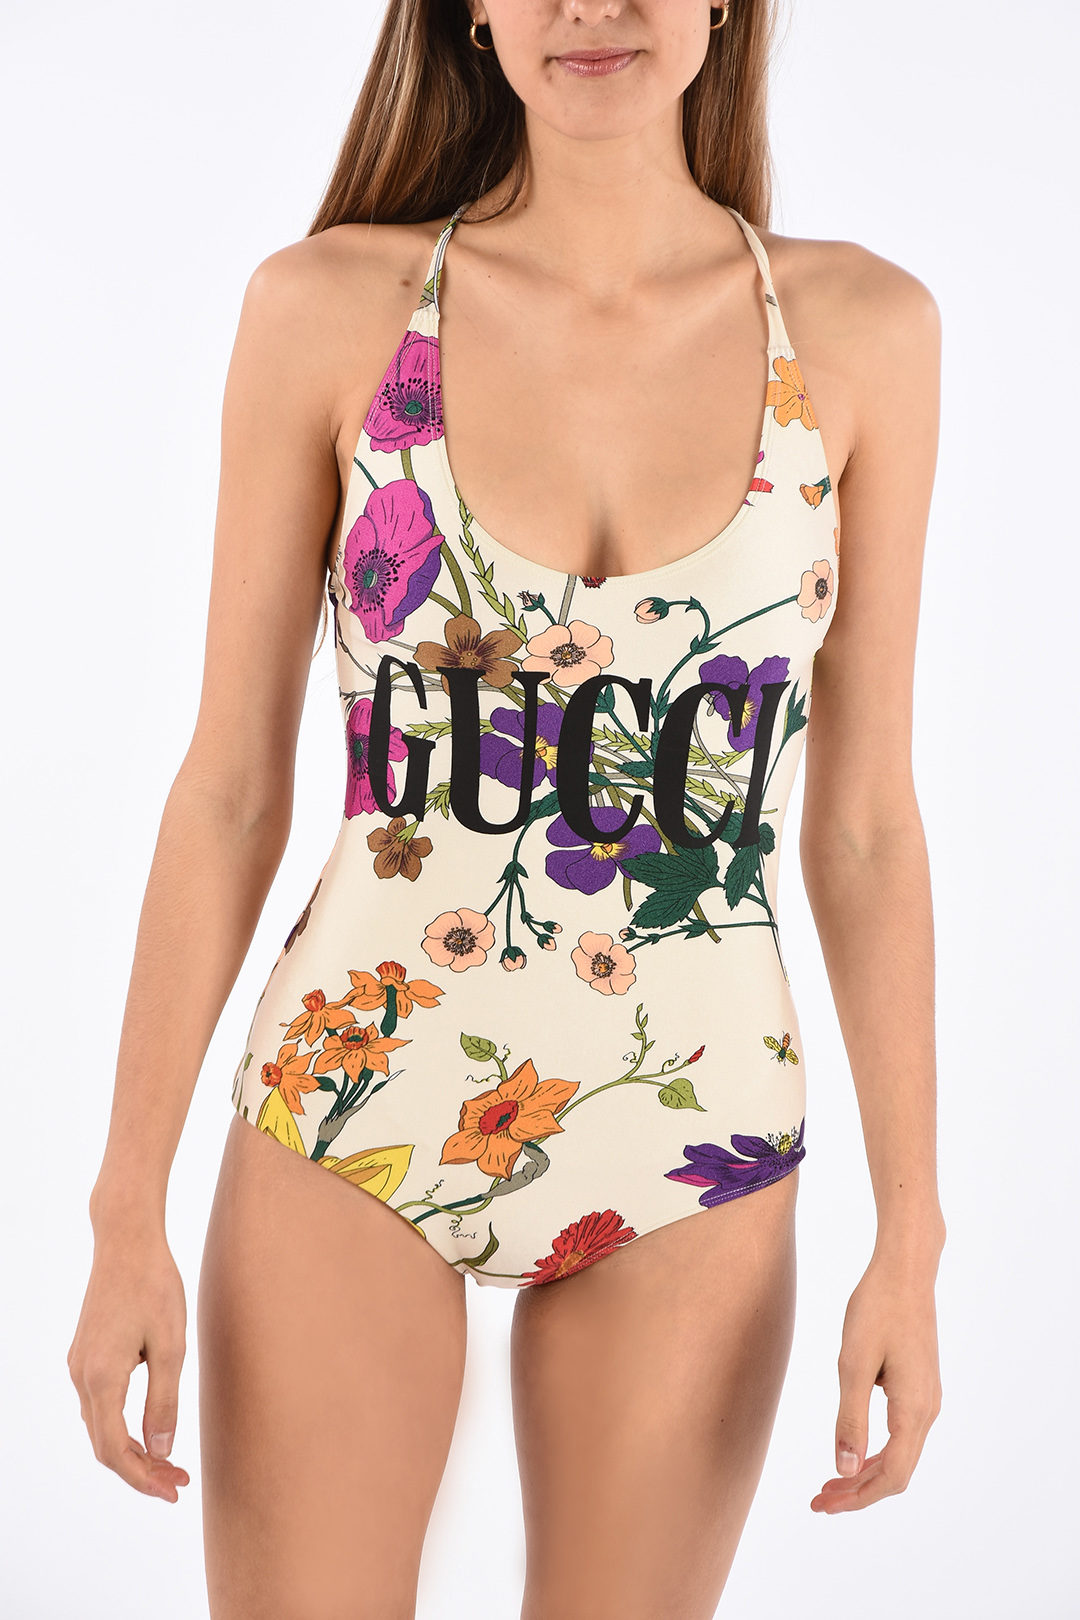 Gucci Floral-print Swimsuit women - Glamood Outlet